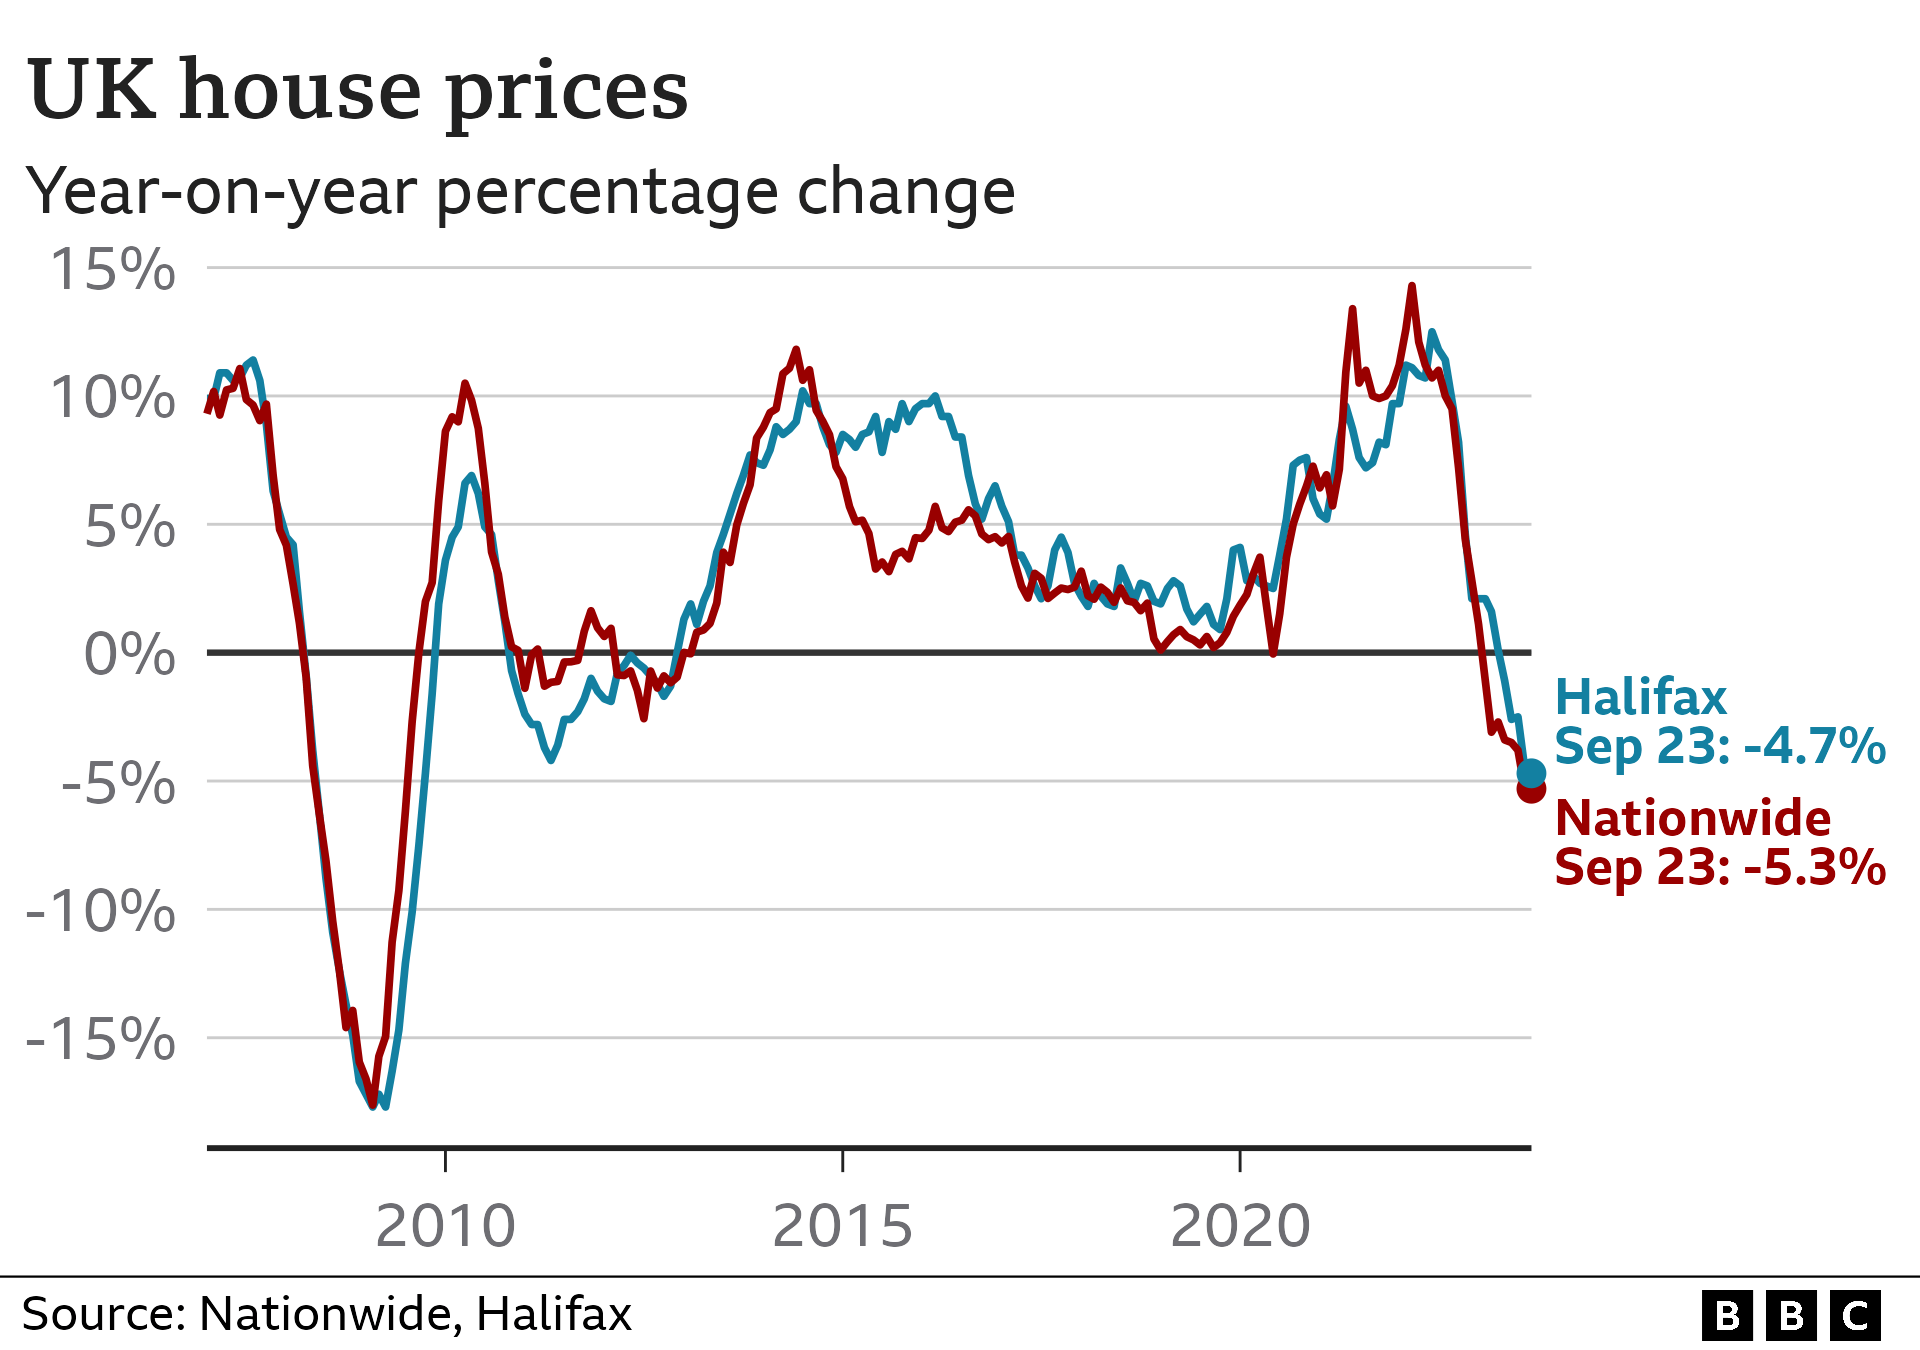 Line chart showing the year-on-year percentage change in house prices